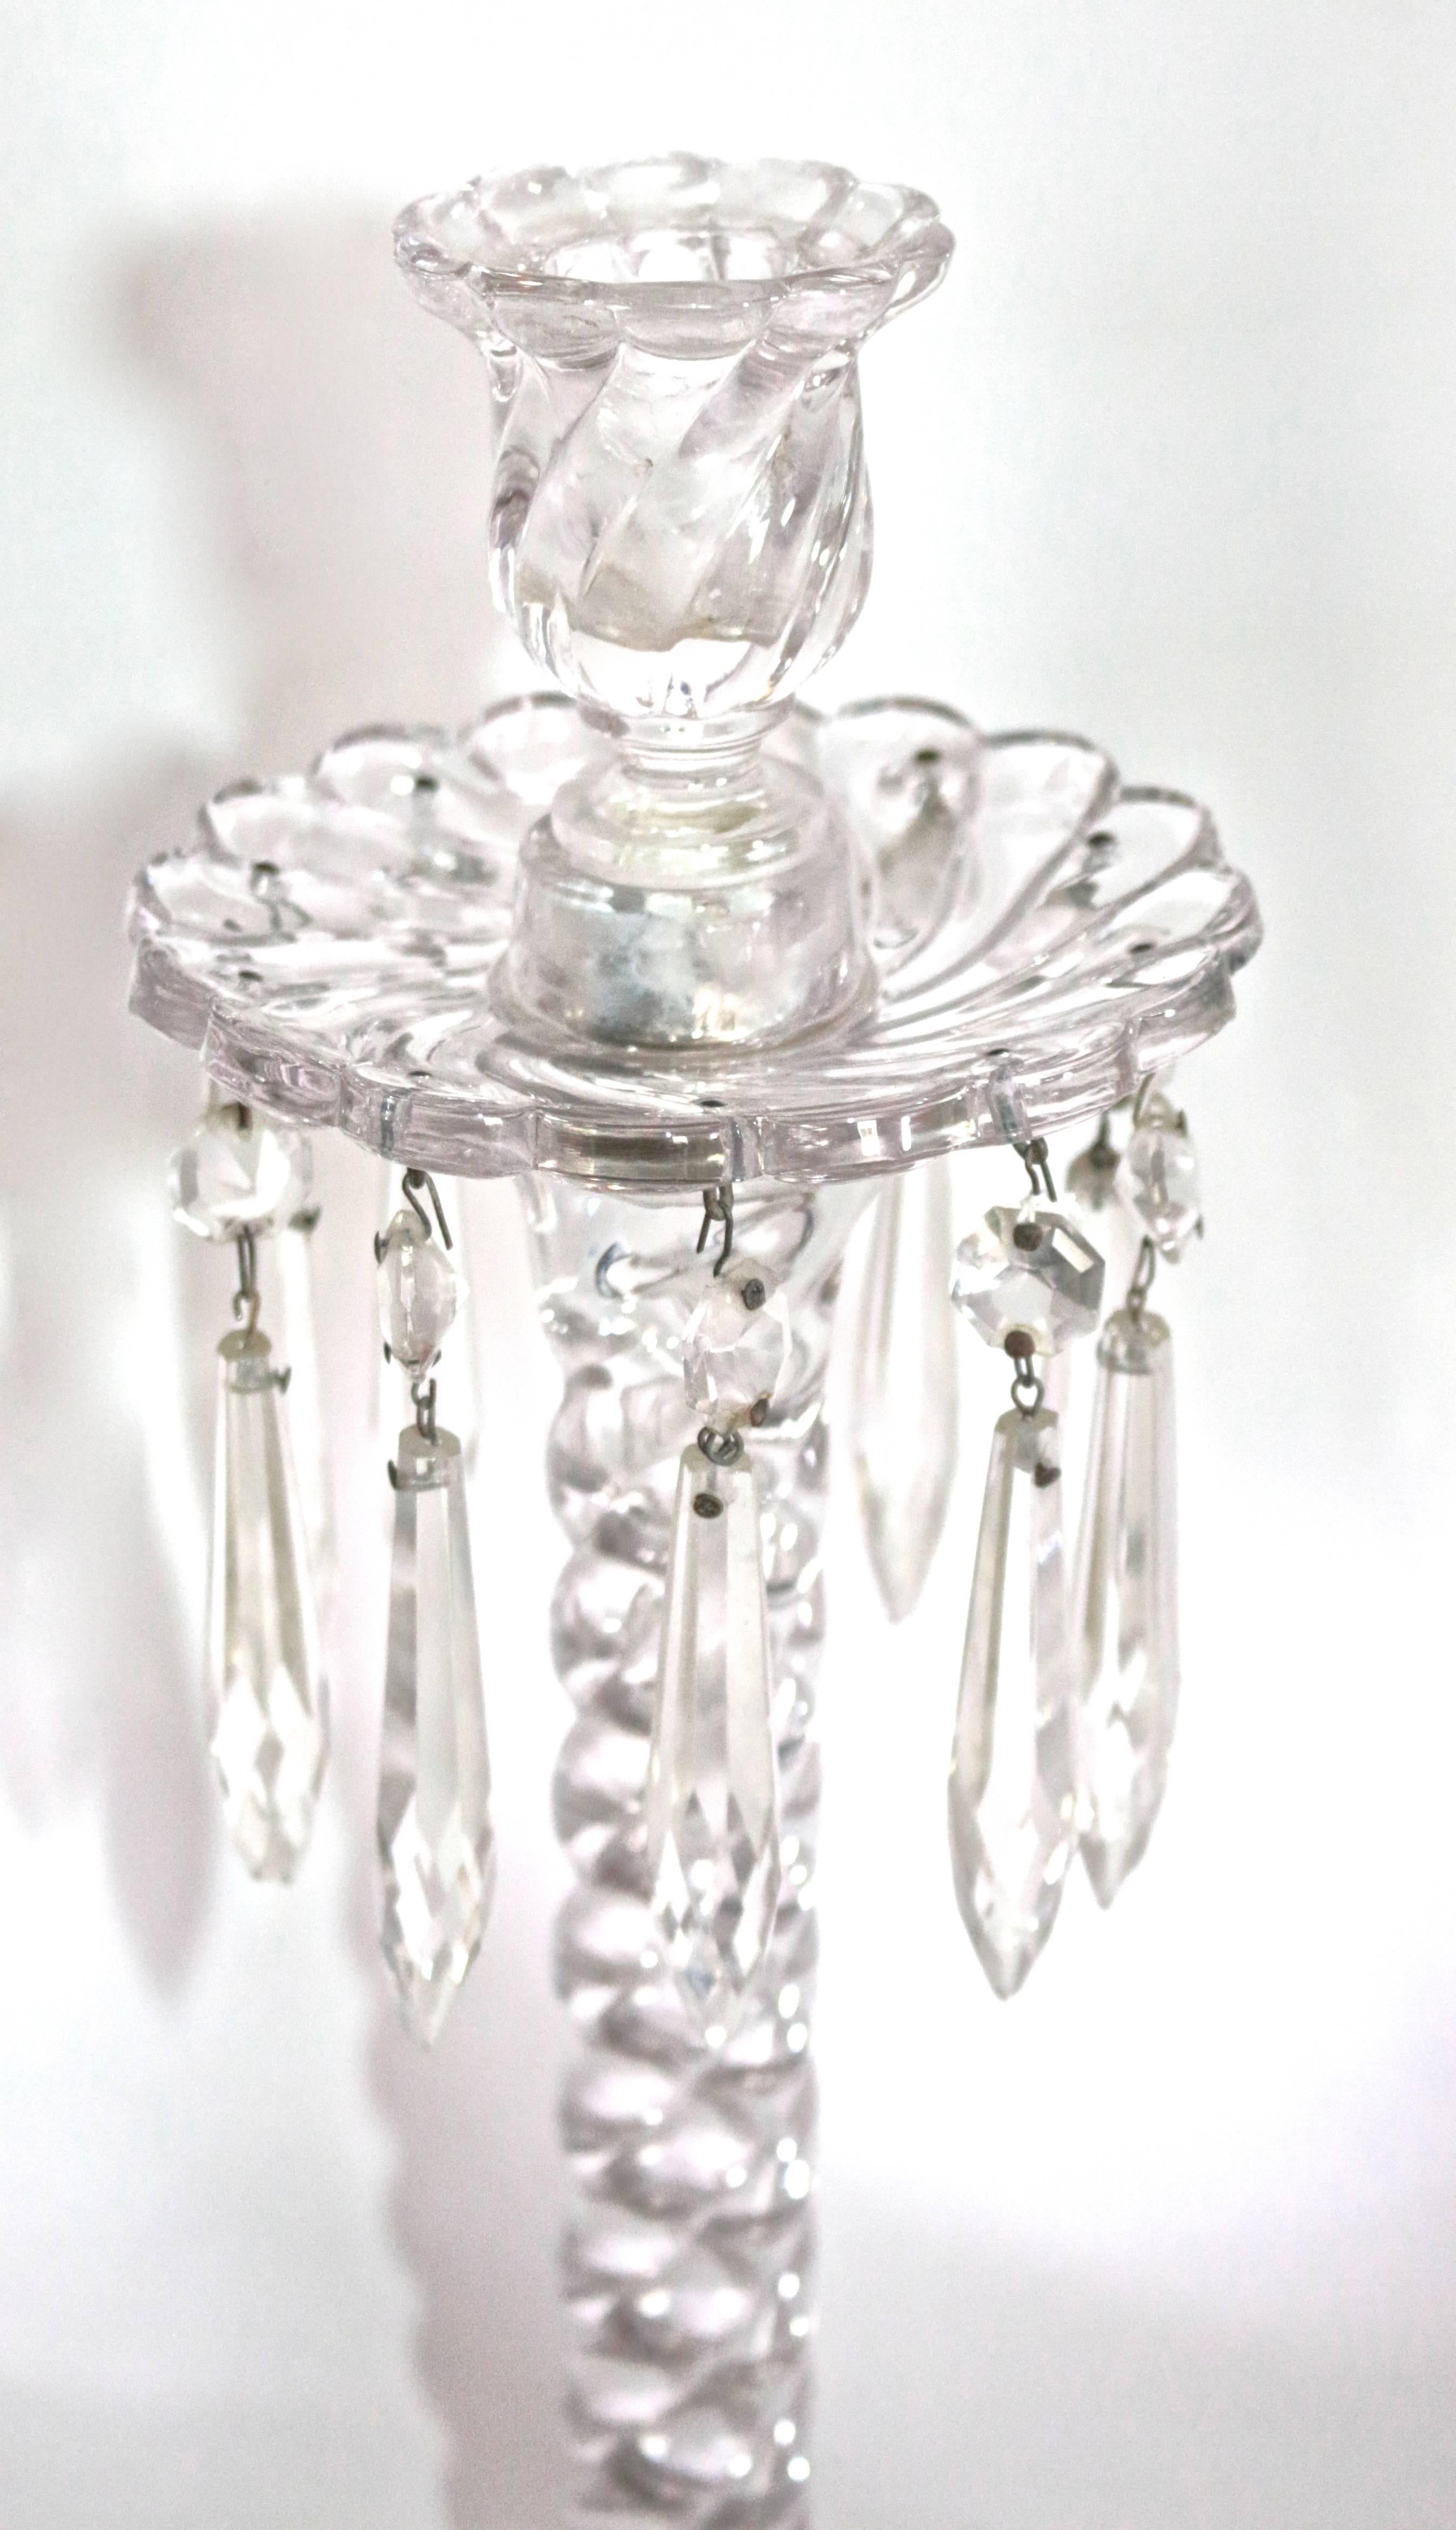 Pair of tall 19th century rope twist crystal candlesticks by Baccarat in a excellent used condition.